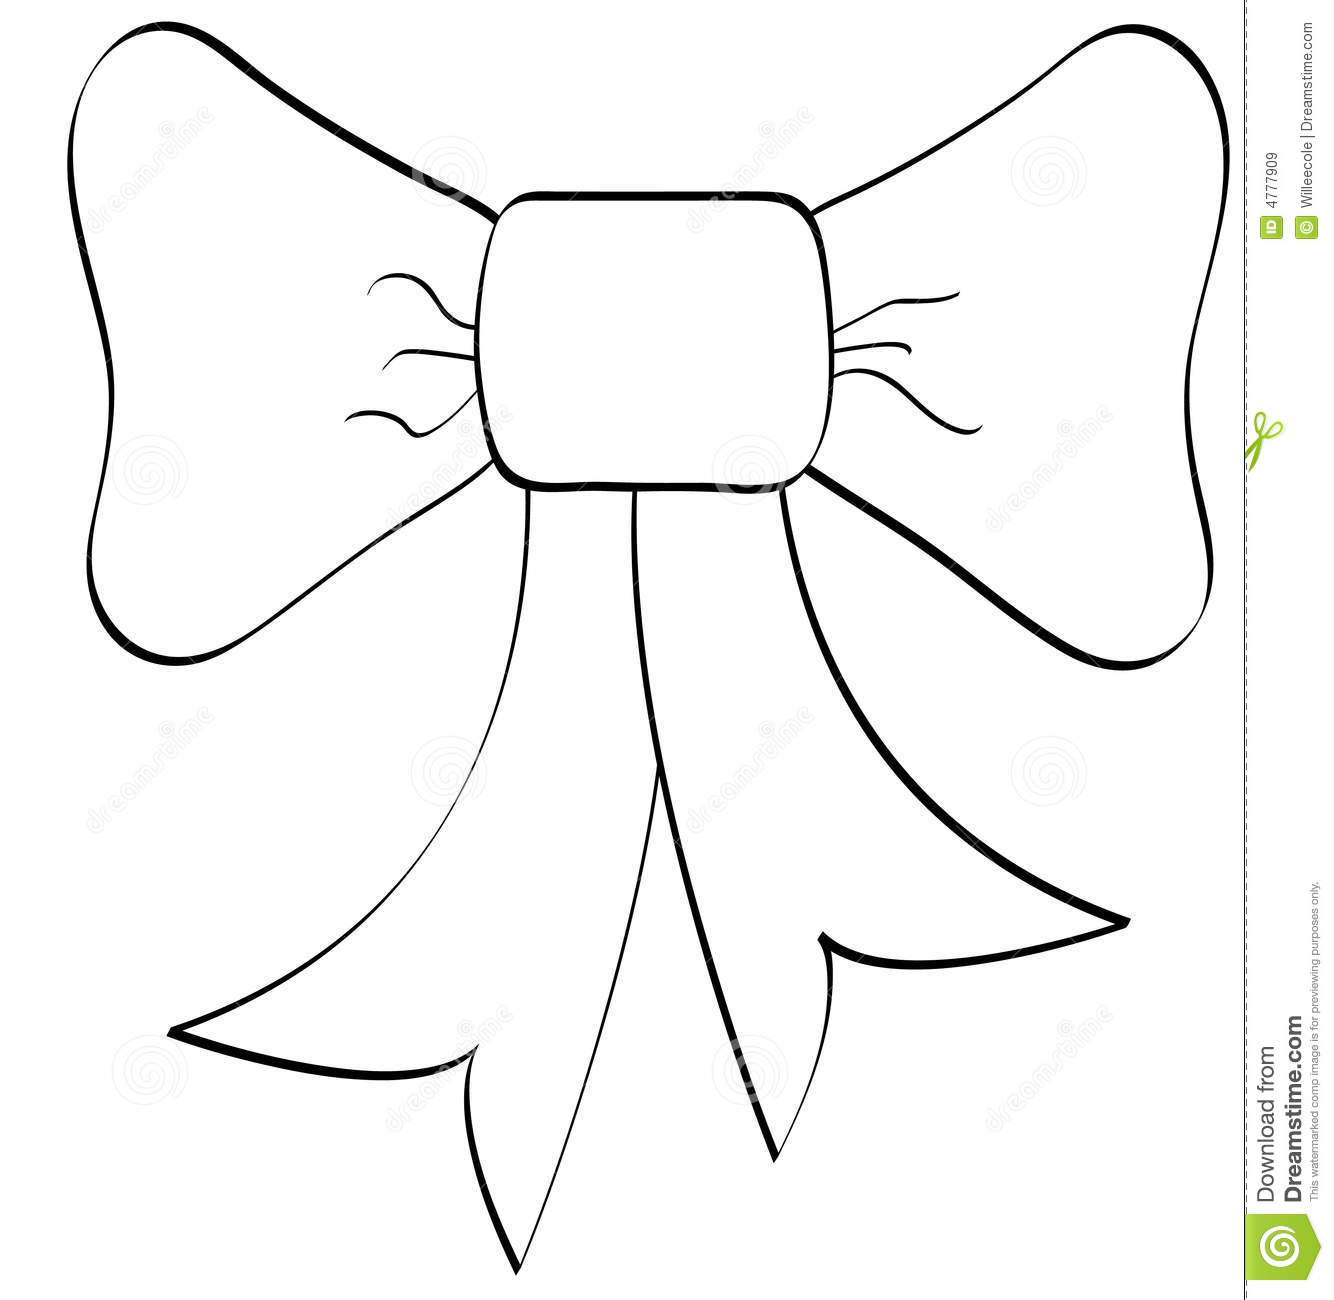 Bow Outline Royalty Free Stock Images   Image  4777909